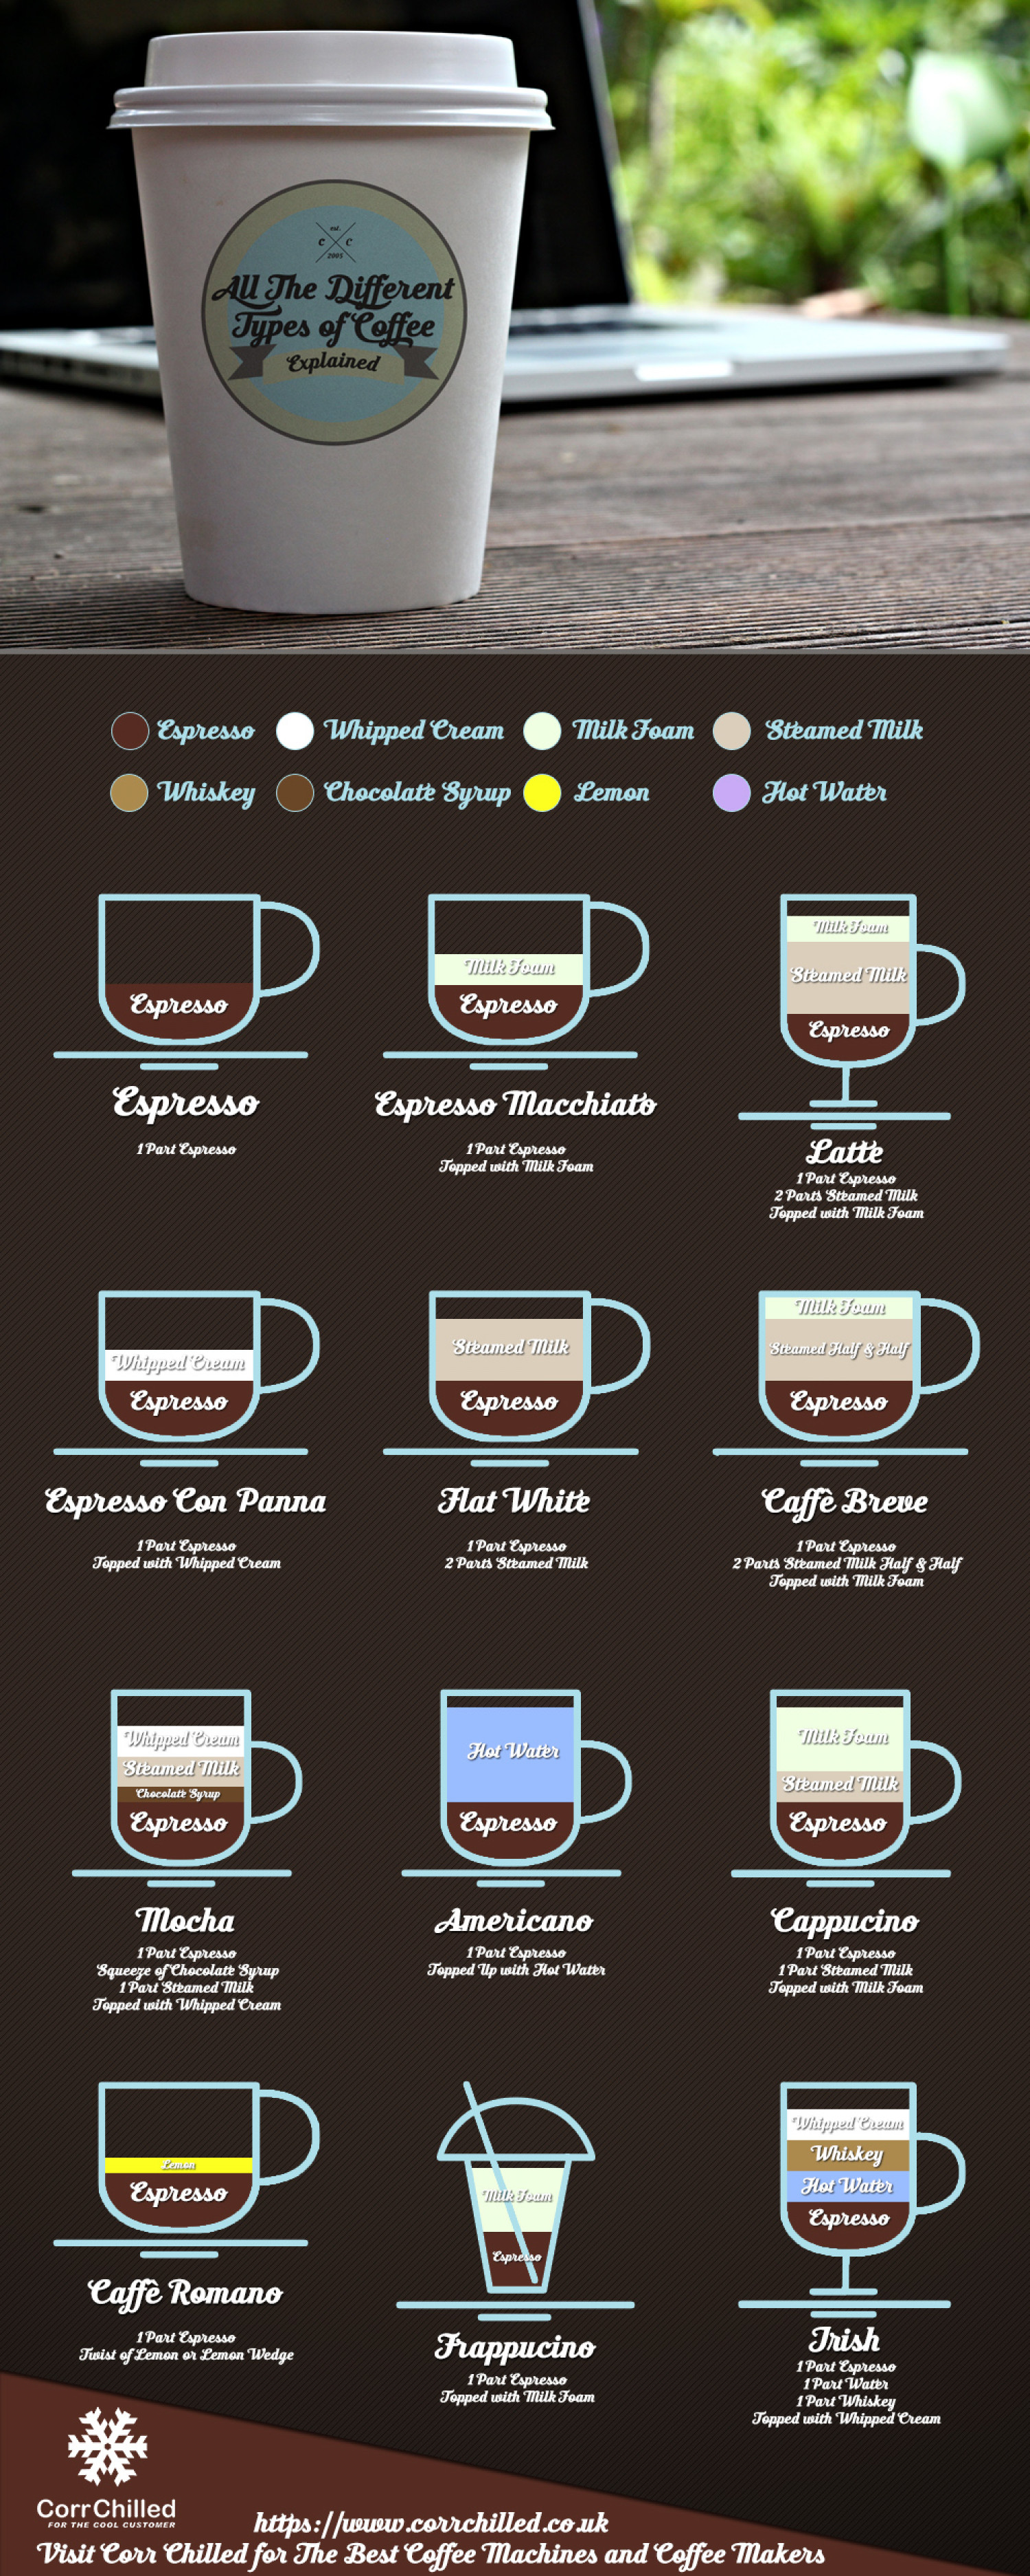 All the Different Types of Coffee Explained Infographic